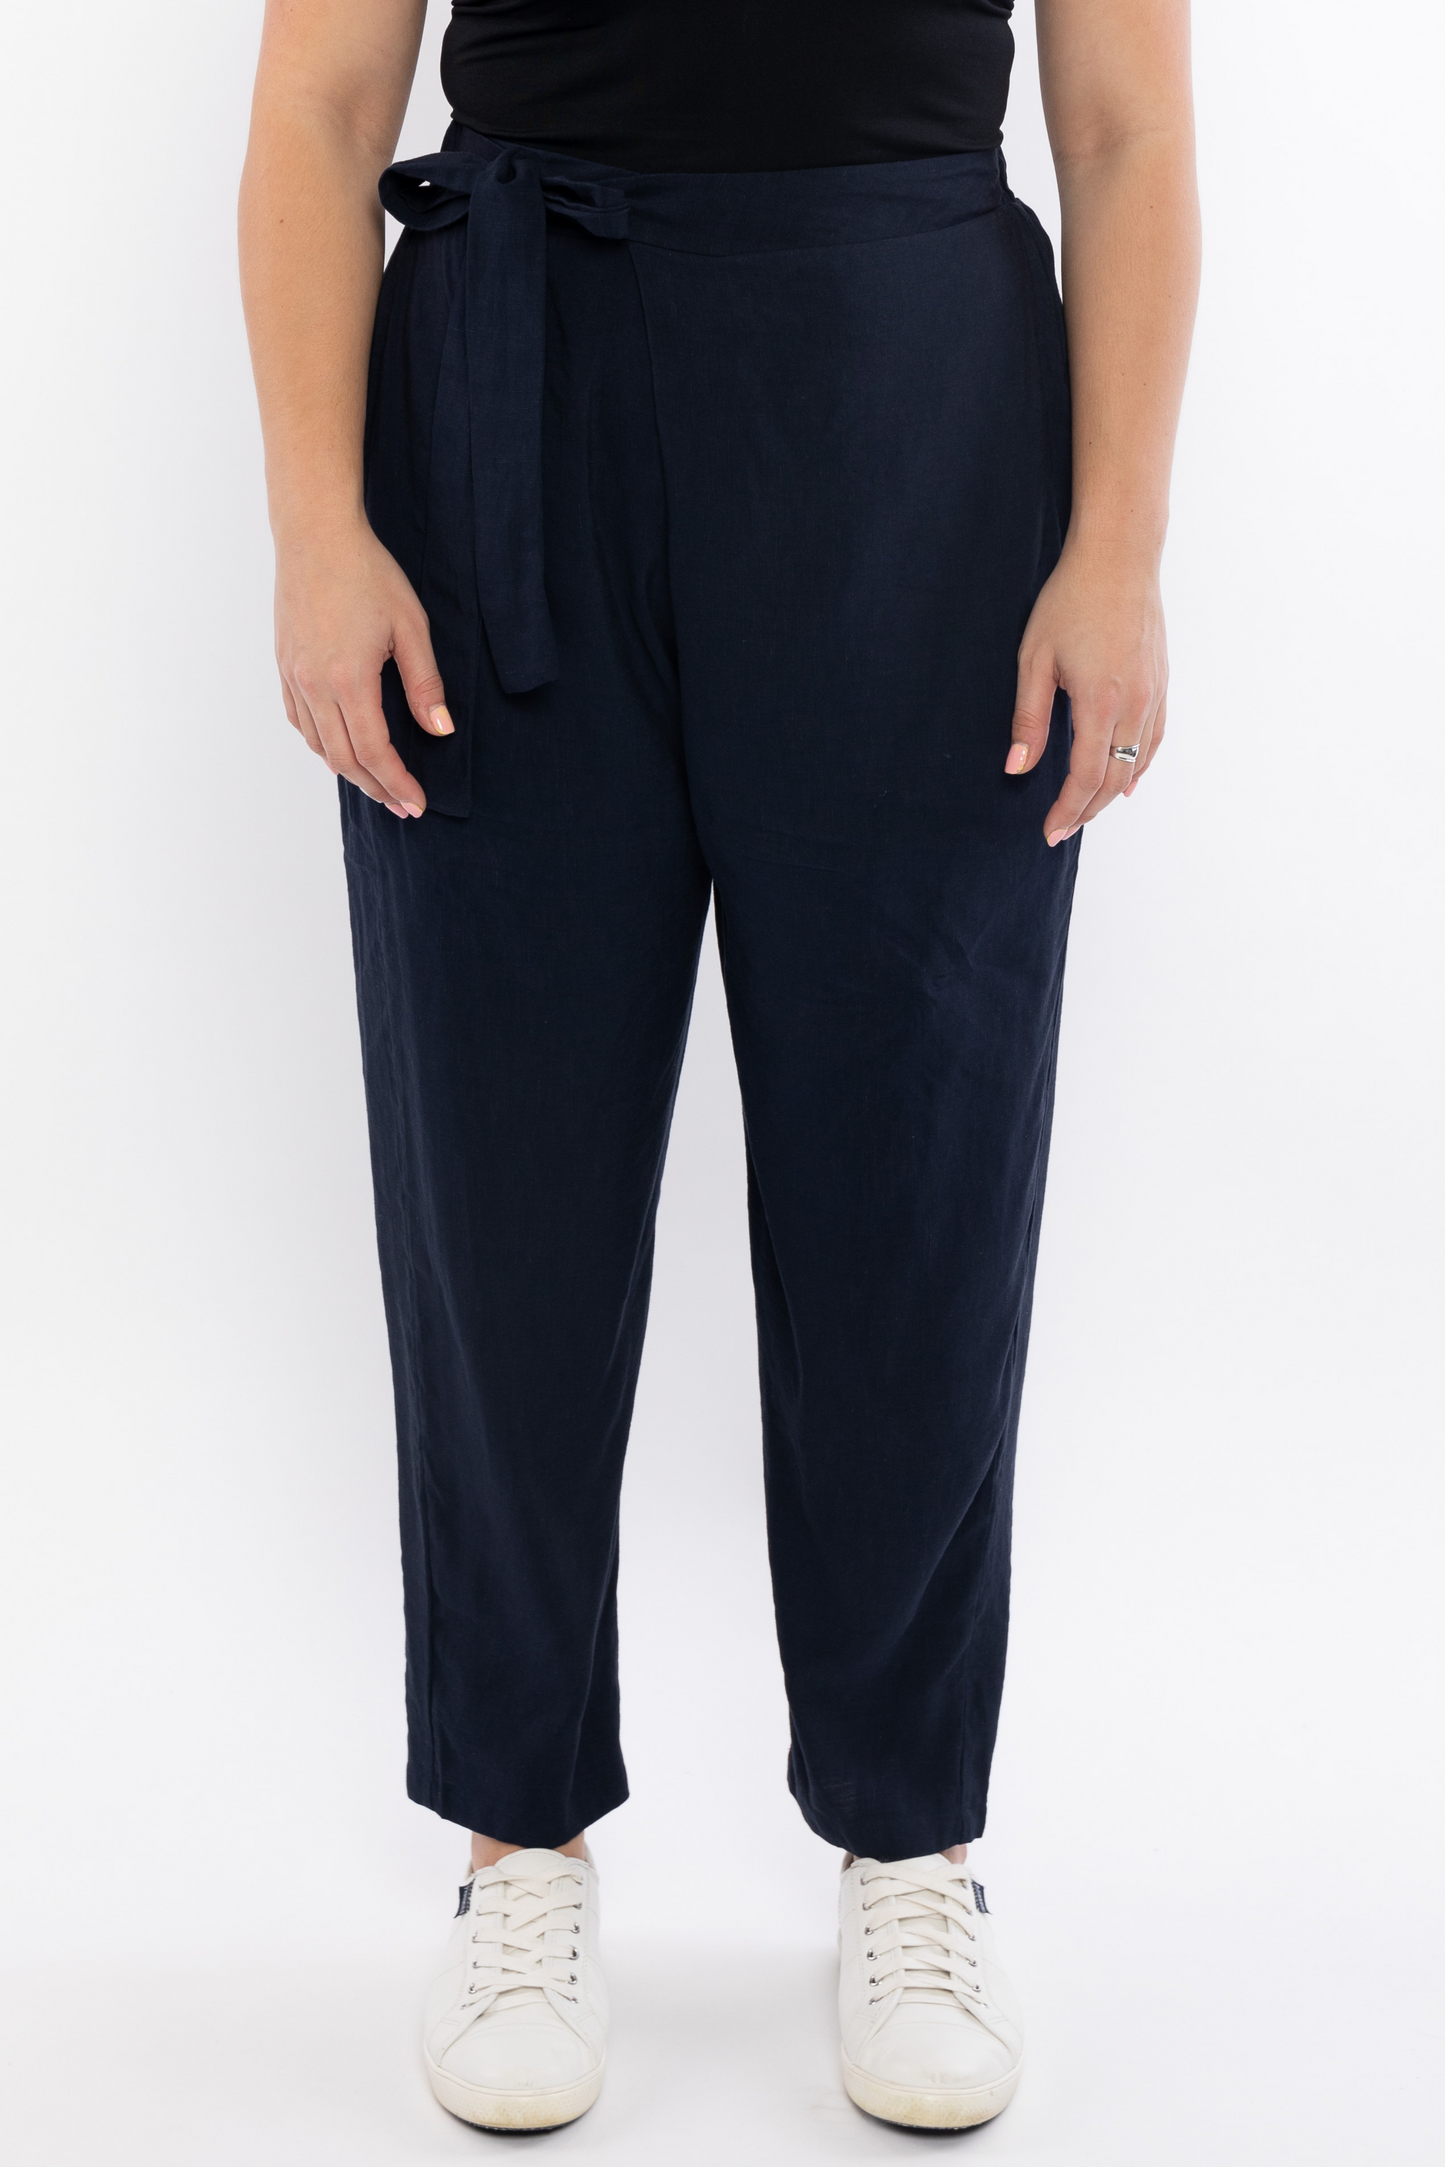 FINAL SALE Melody Pleat Pant in Navy